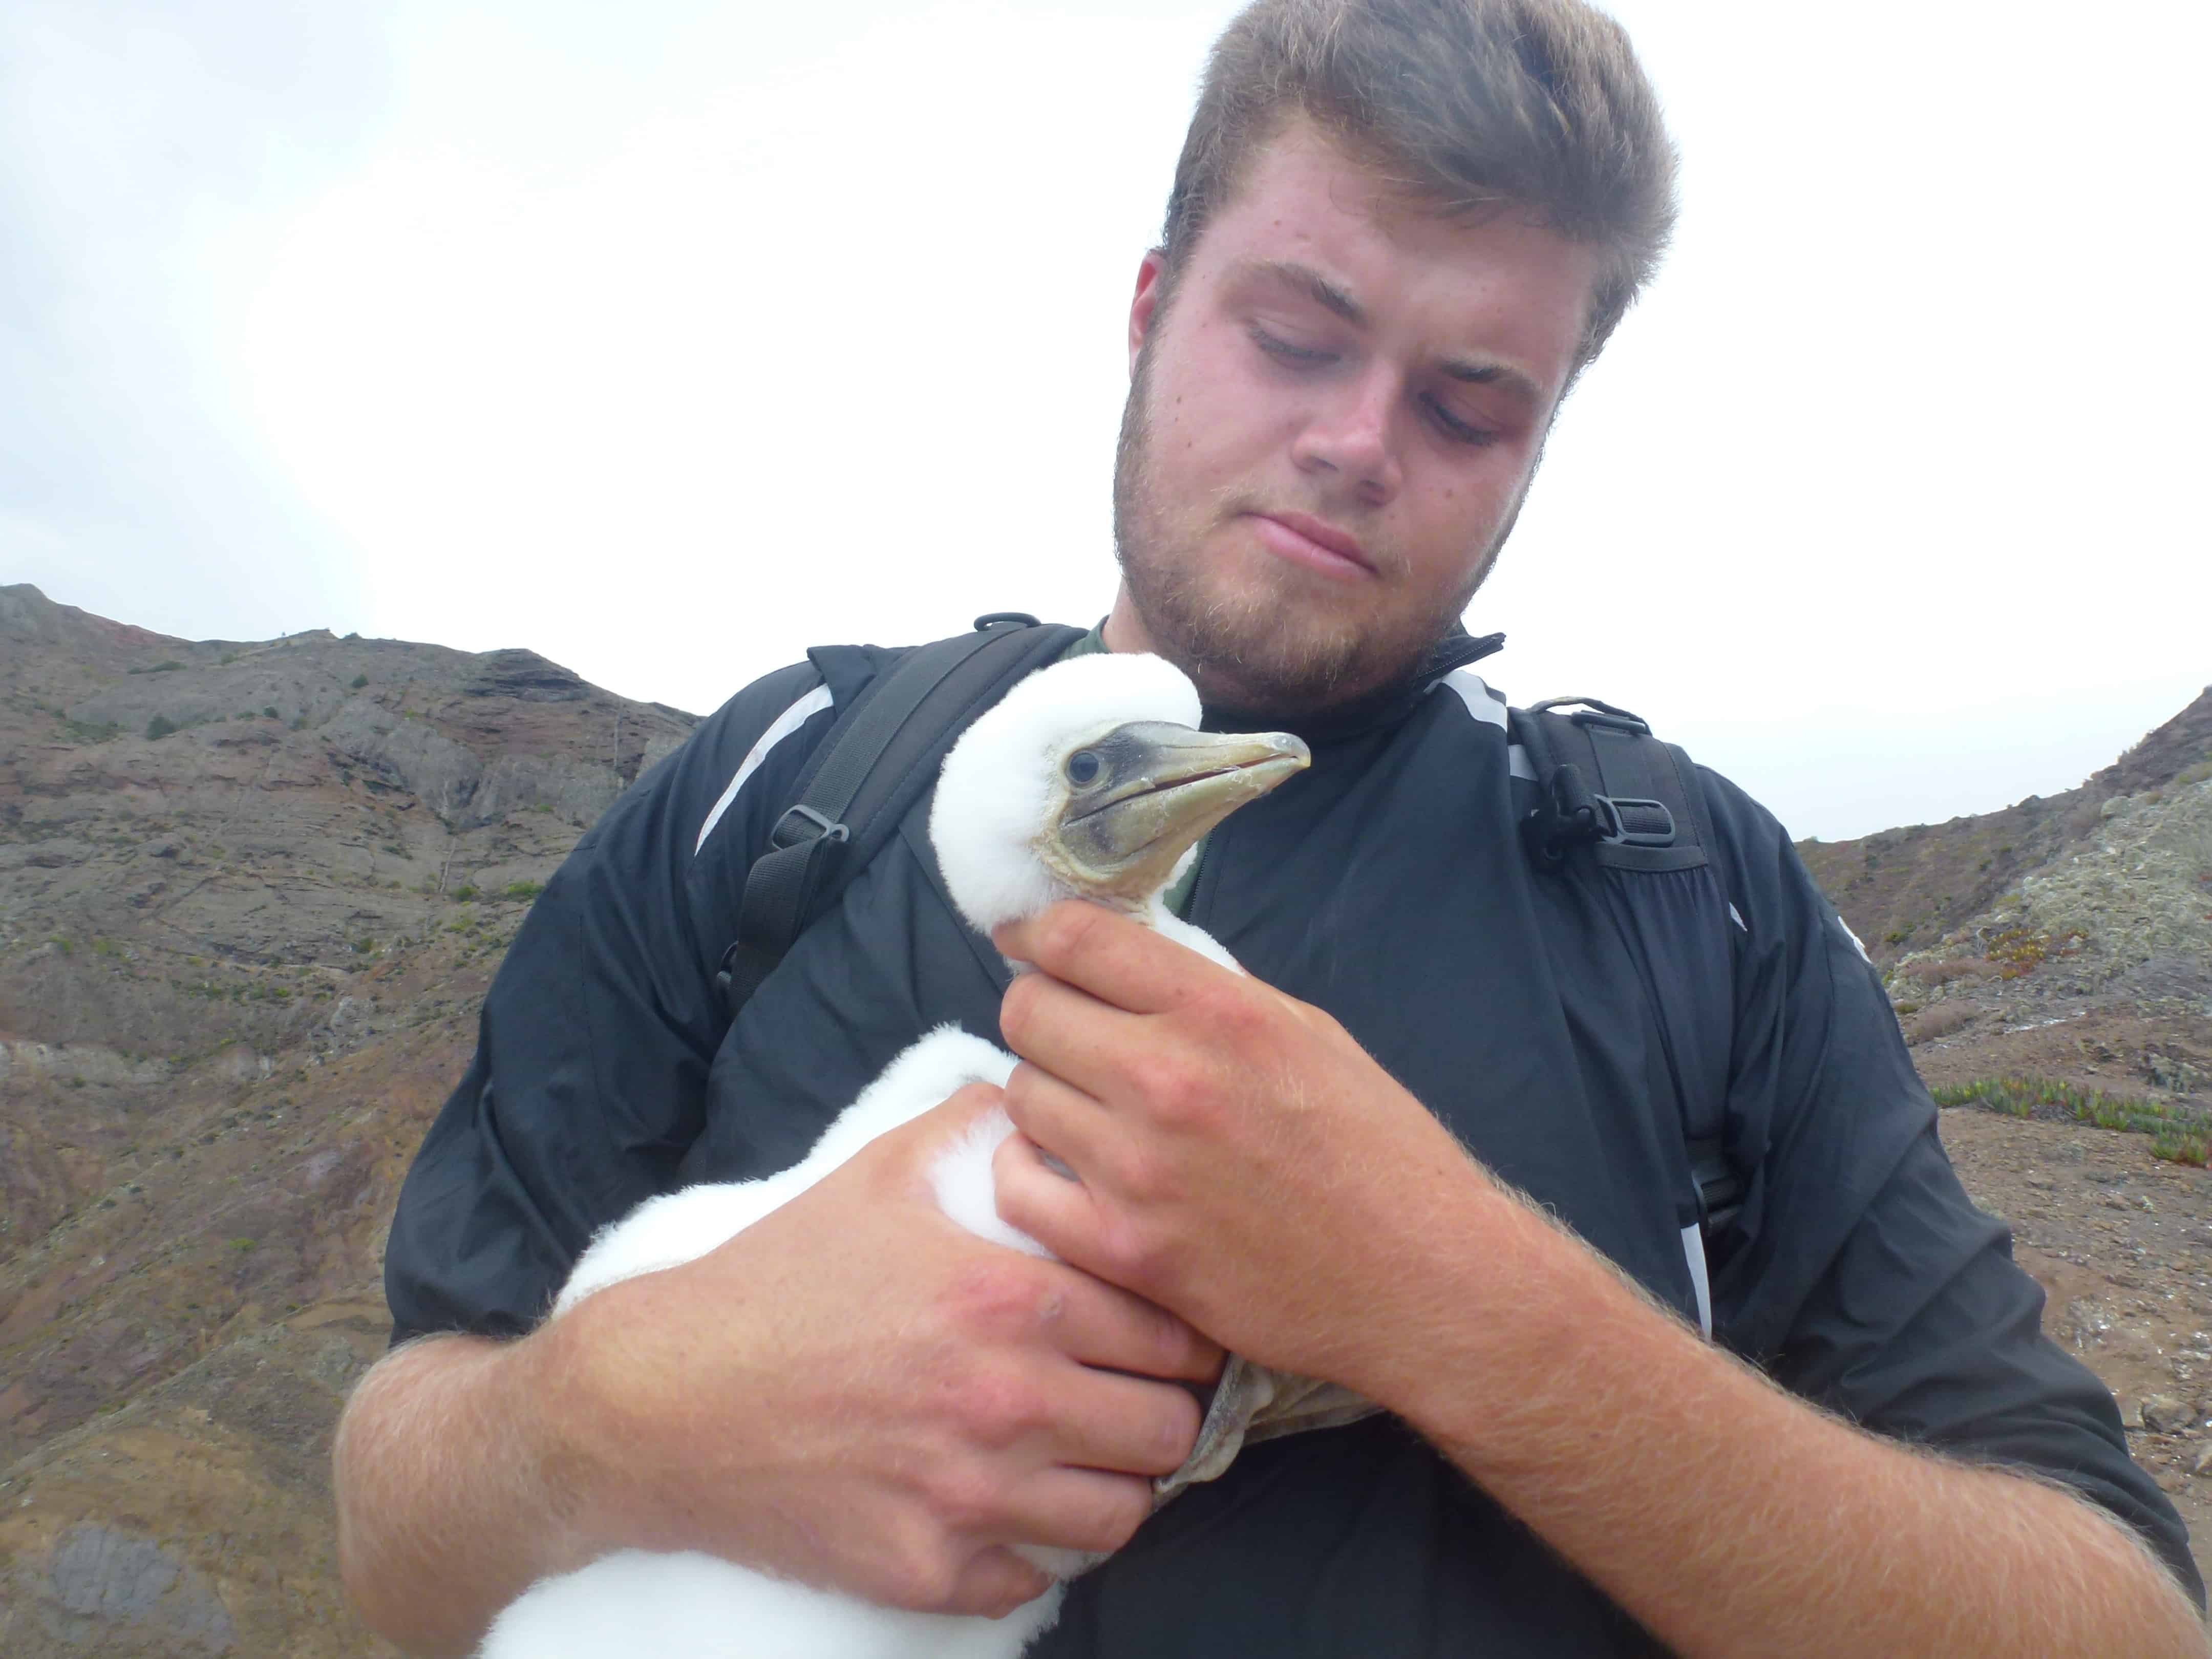 Felix Driver spent over 8 months working with local conservation groups including St Helena National Trust; Here he is holding a masked booby as part of survey work.